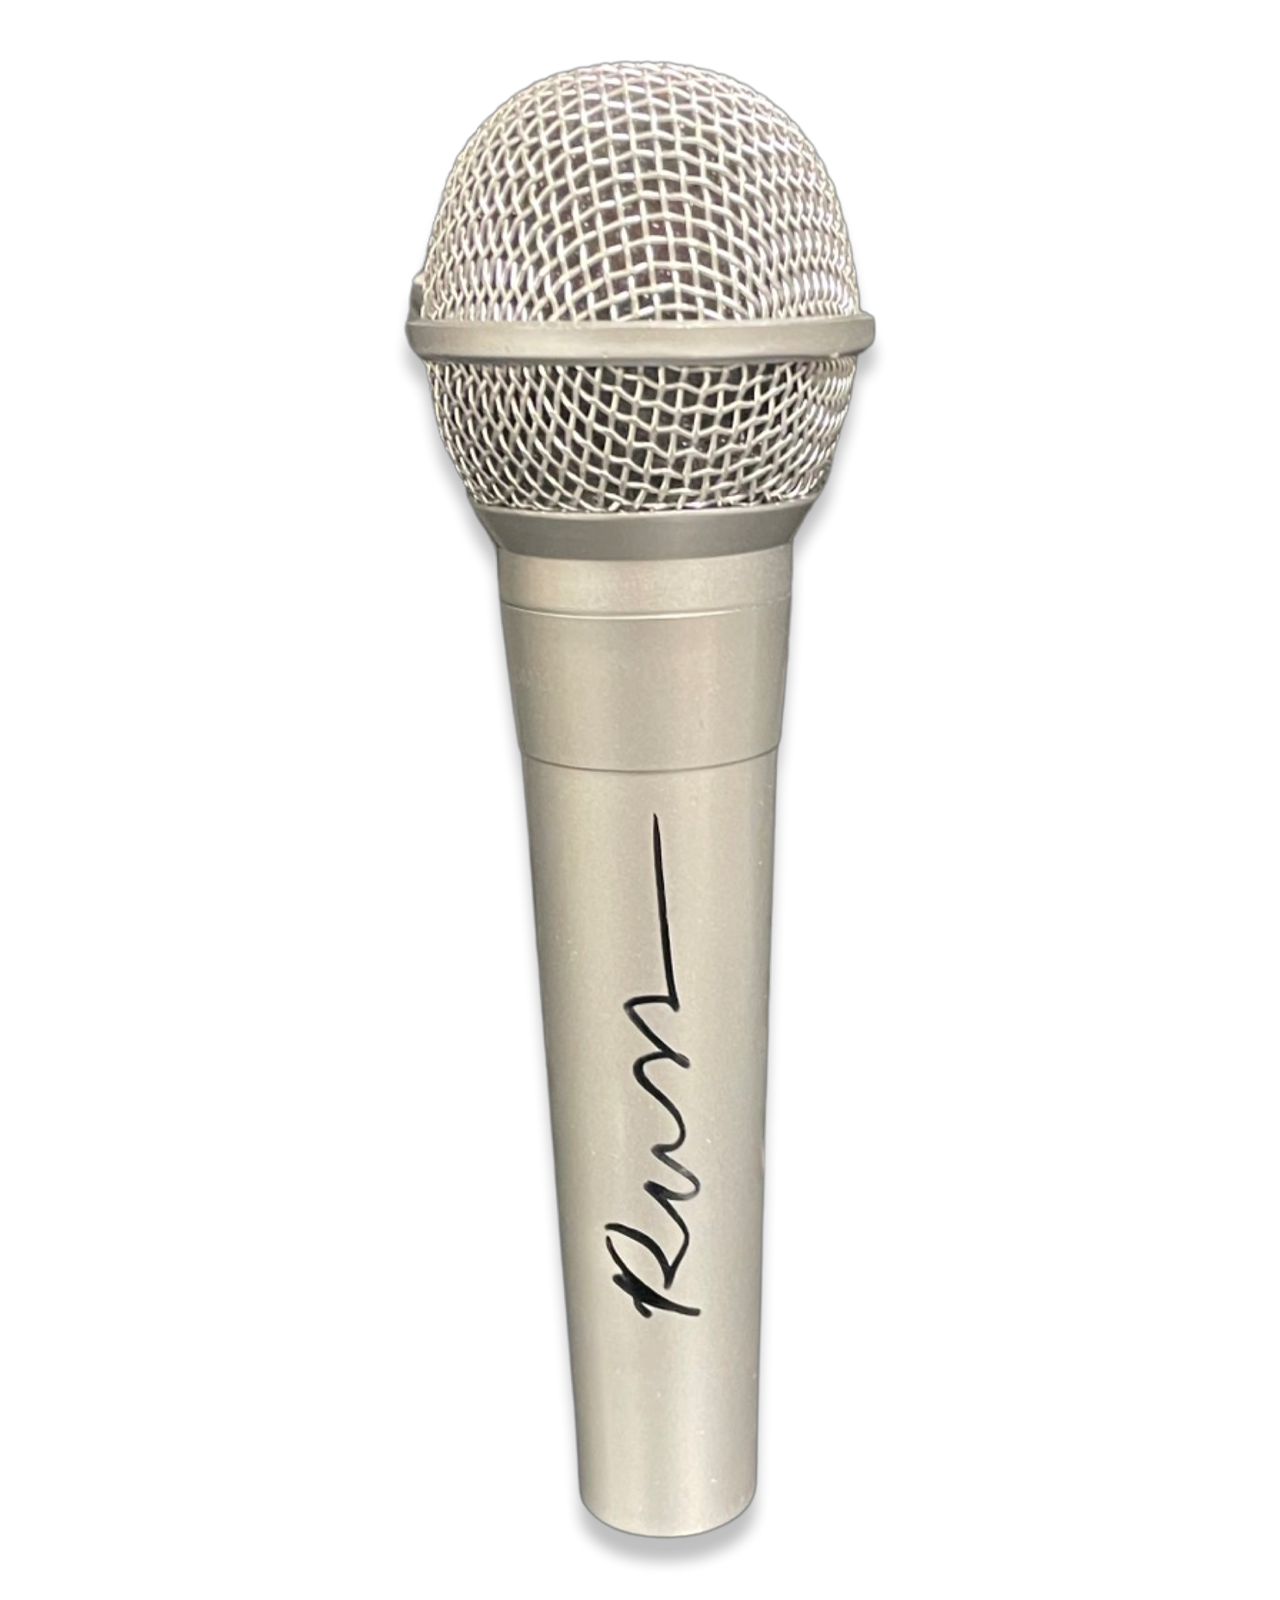 RUSS SIGNED OFFICIAL MICROPHONE US RAP STAR RUSSELL VITALE (AFTAL COA)